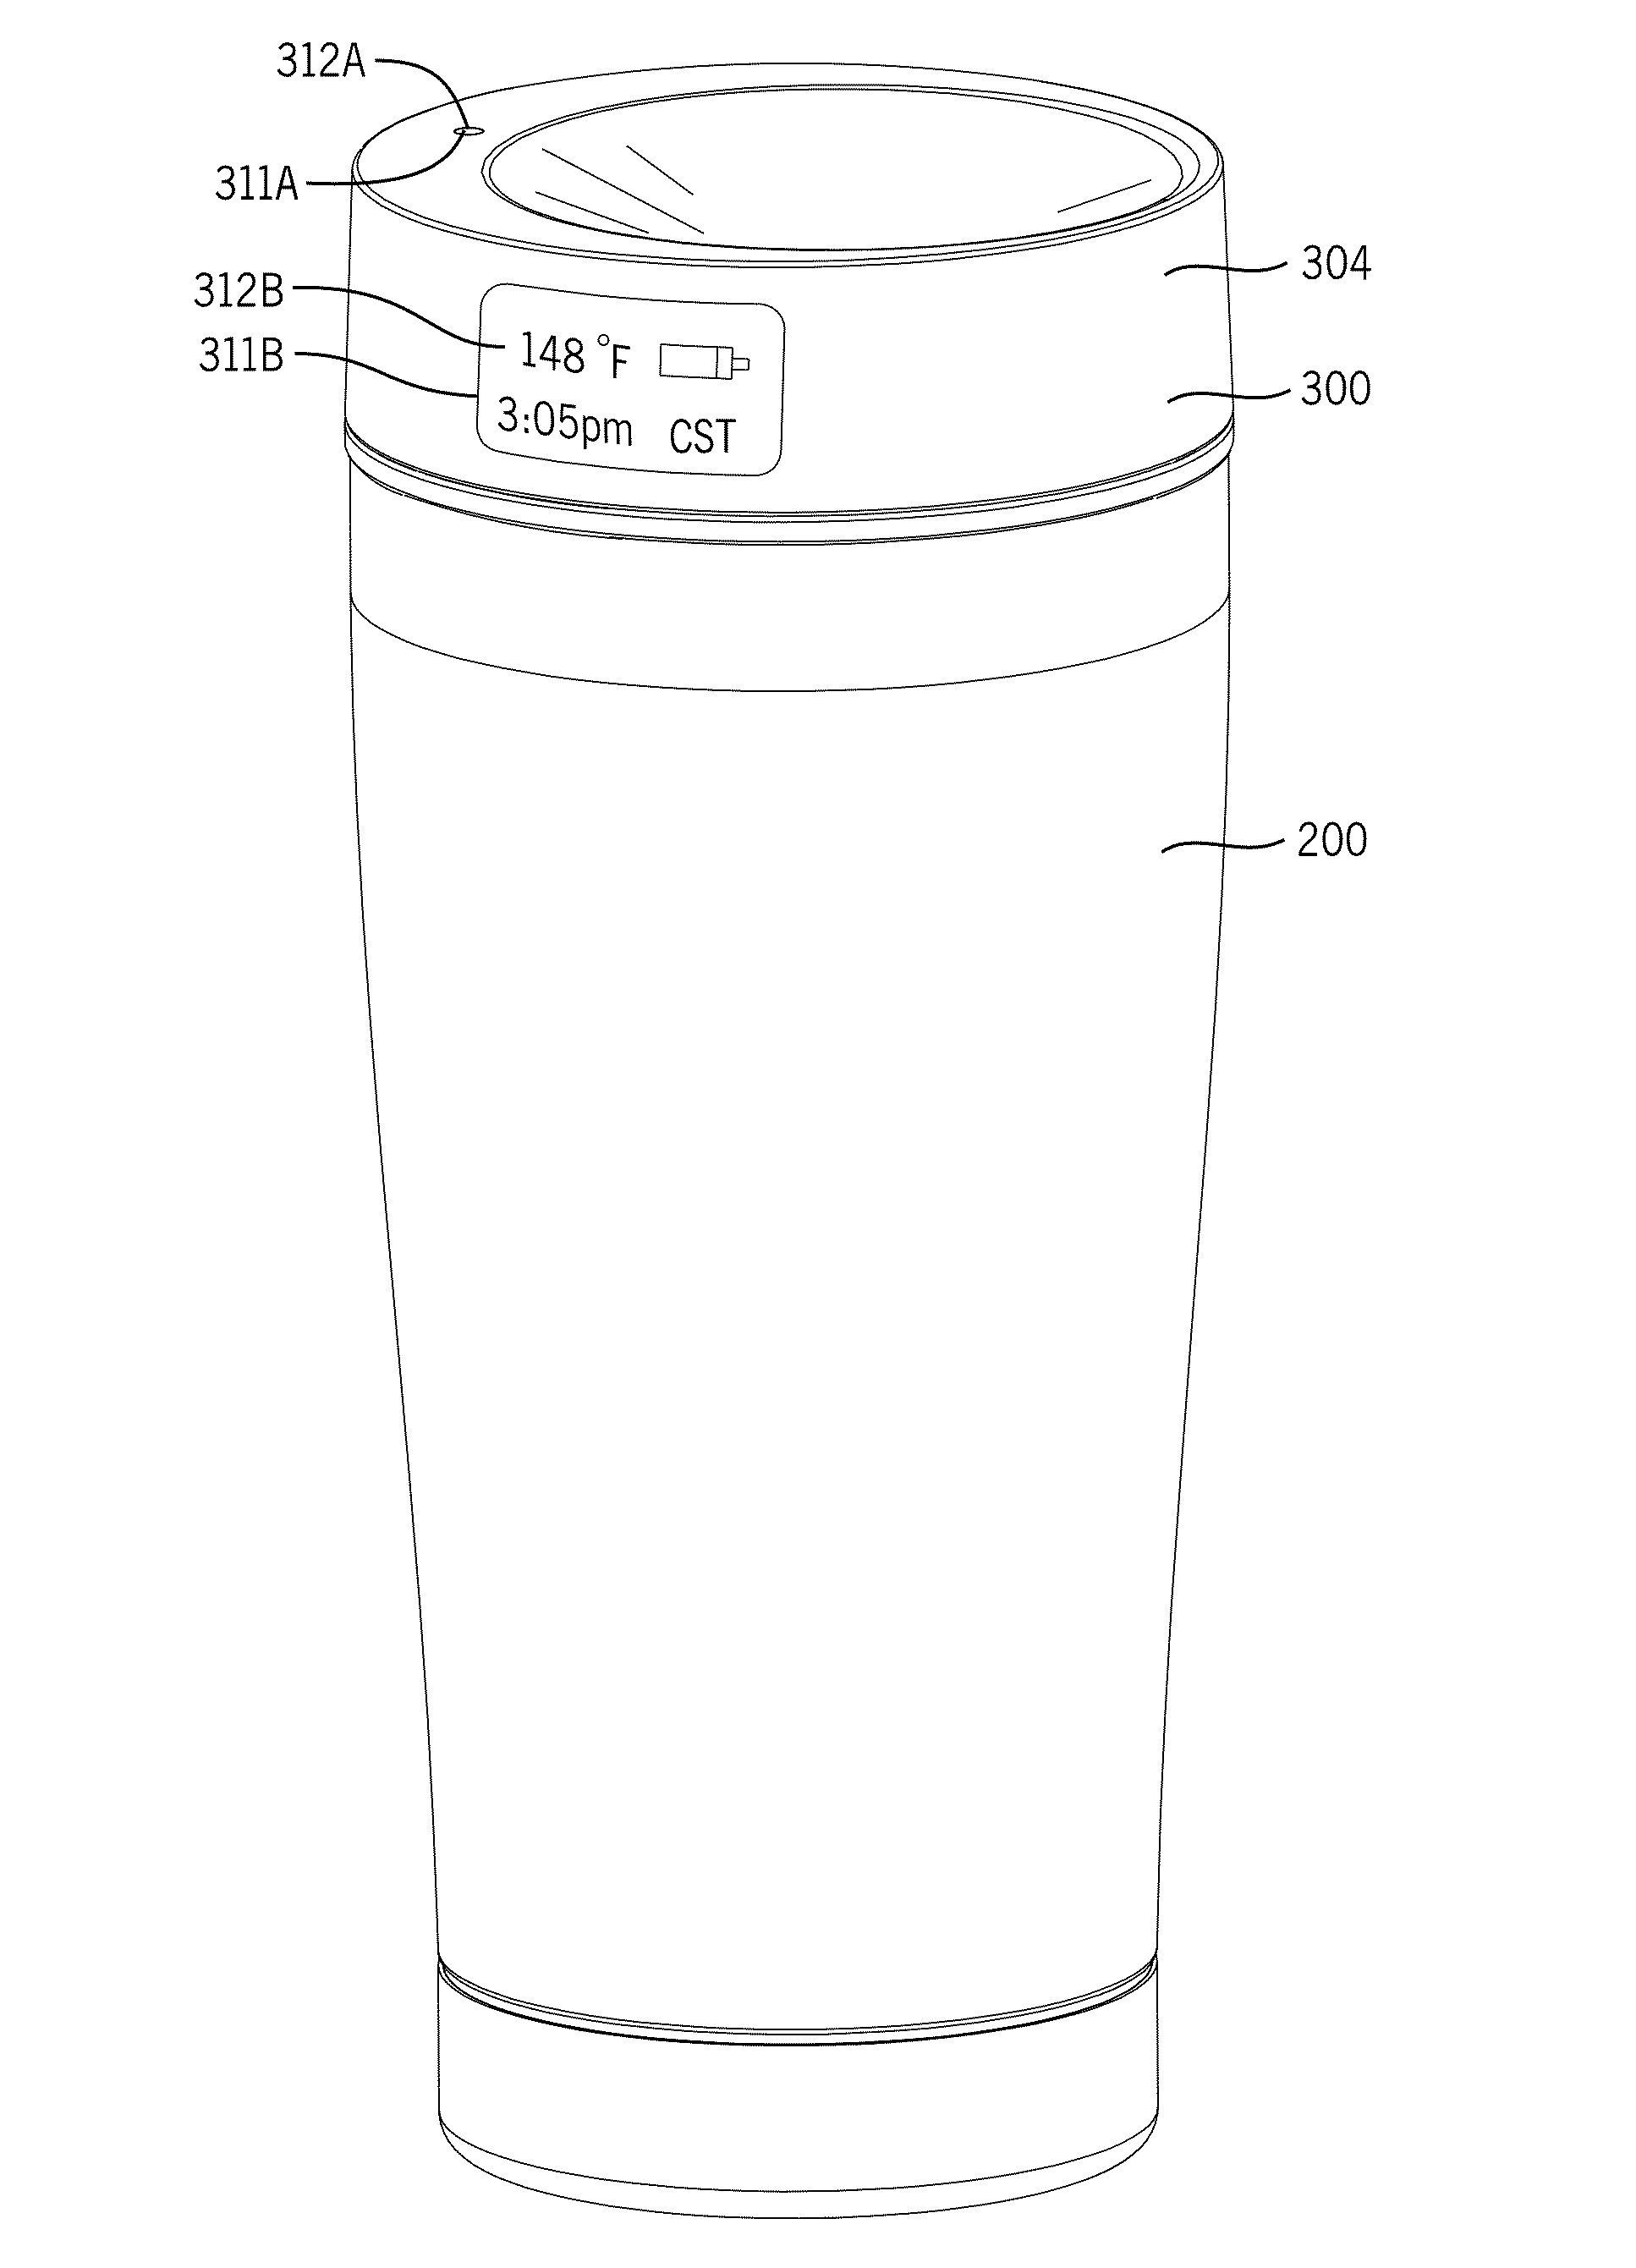 System and methods for managing a container or its contents